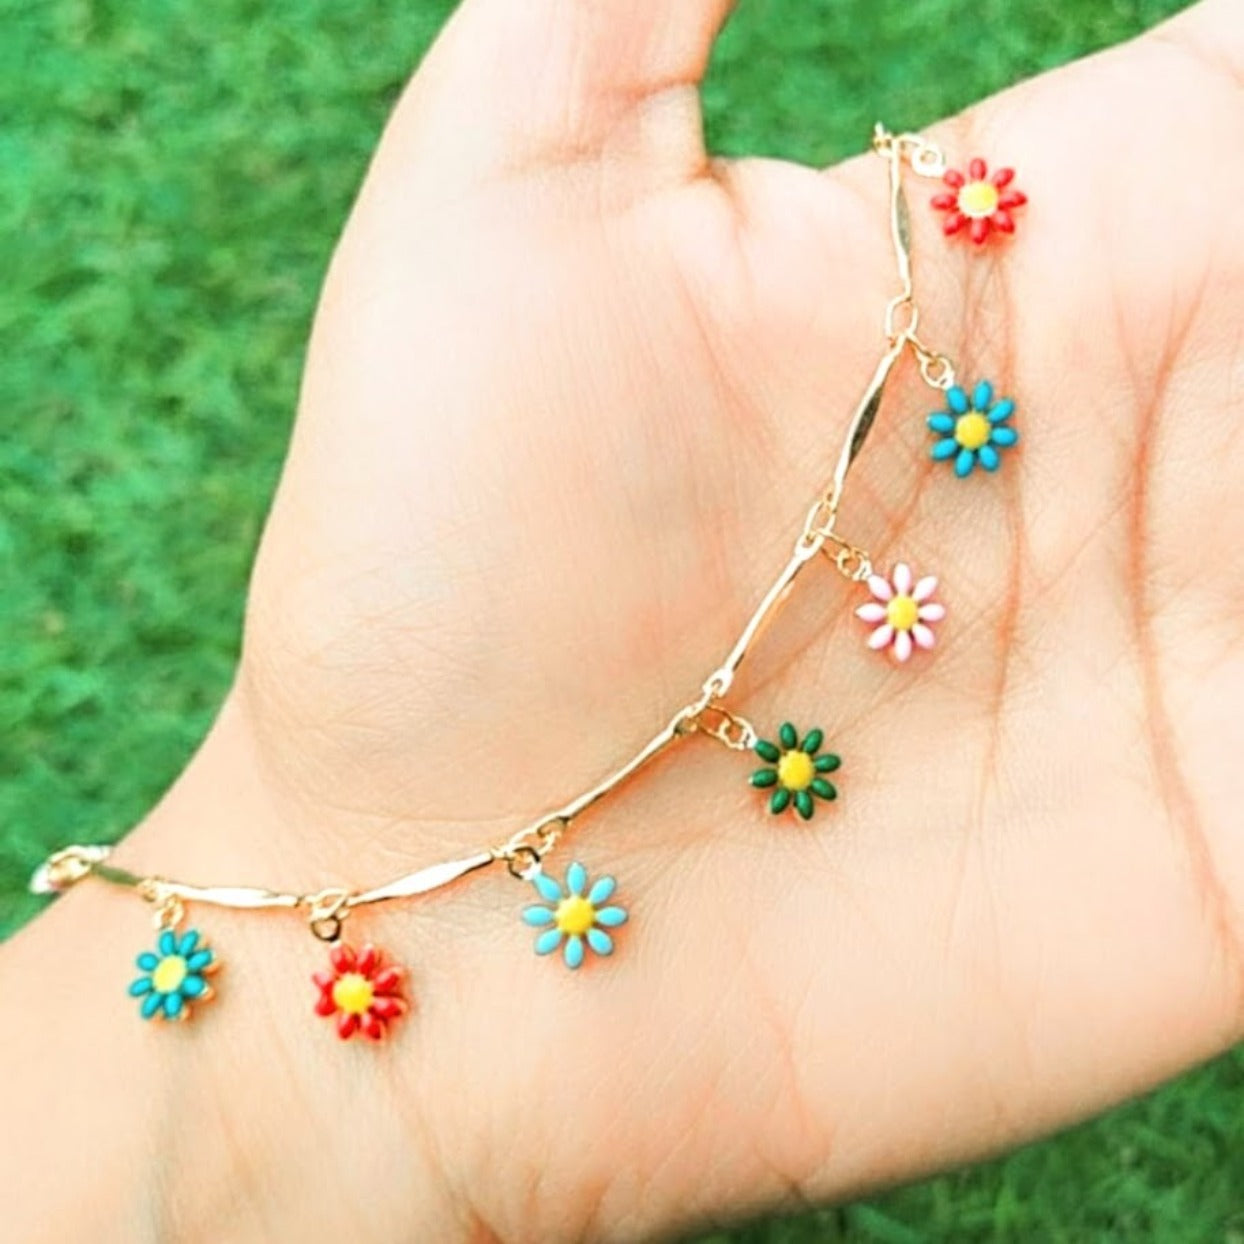 DAISY RAINBOWS 18K GOLD OR SILVER  WATERPROOF ANKLET - Premium anklets from www.beachboho.com.au - Just $49! Shop now at www.beachboho.com.au